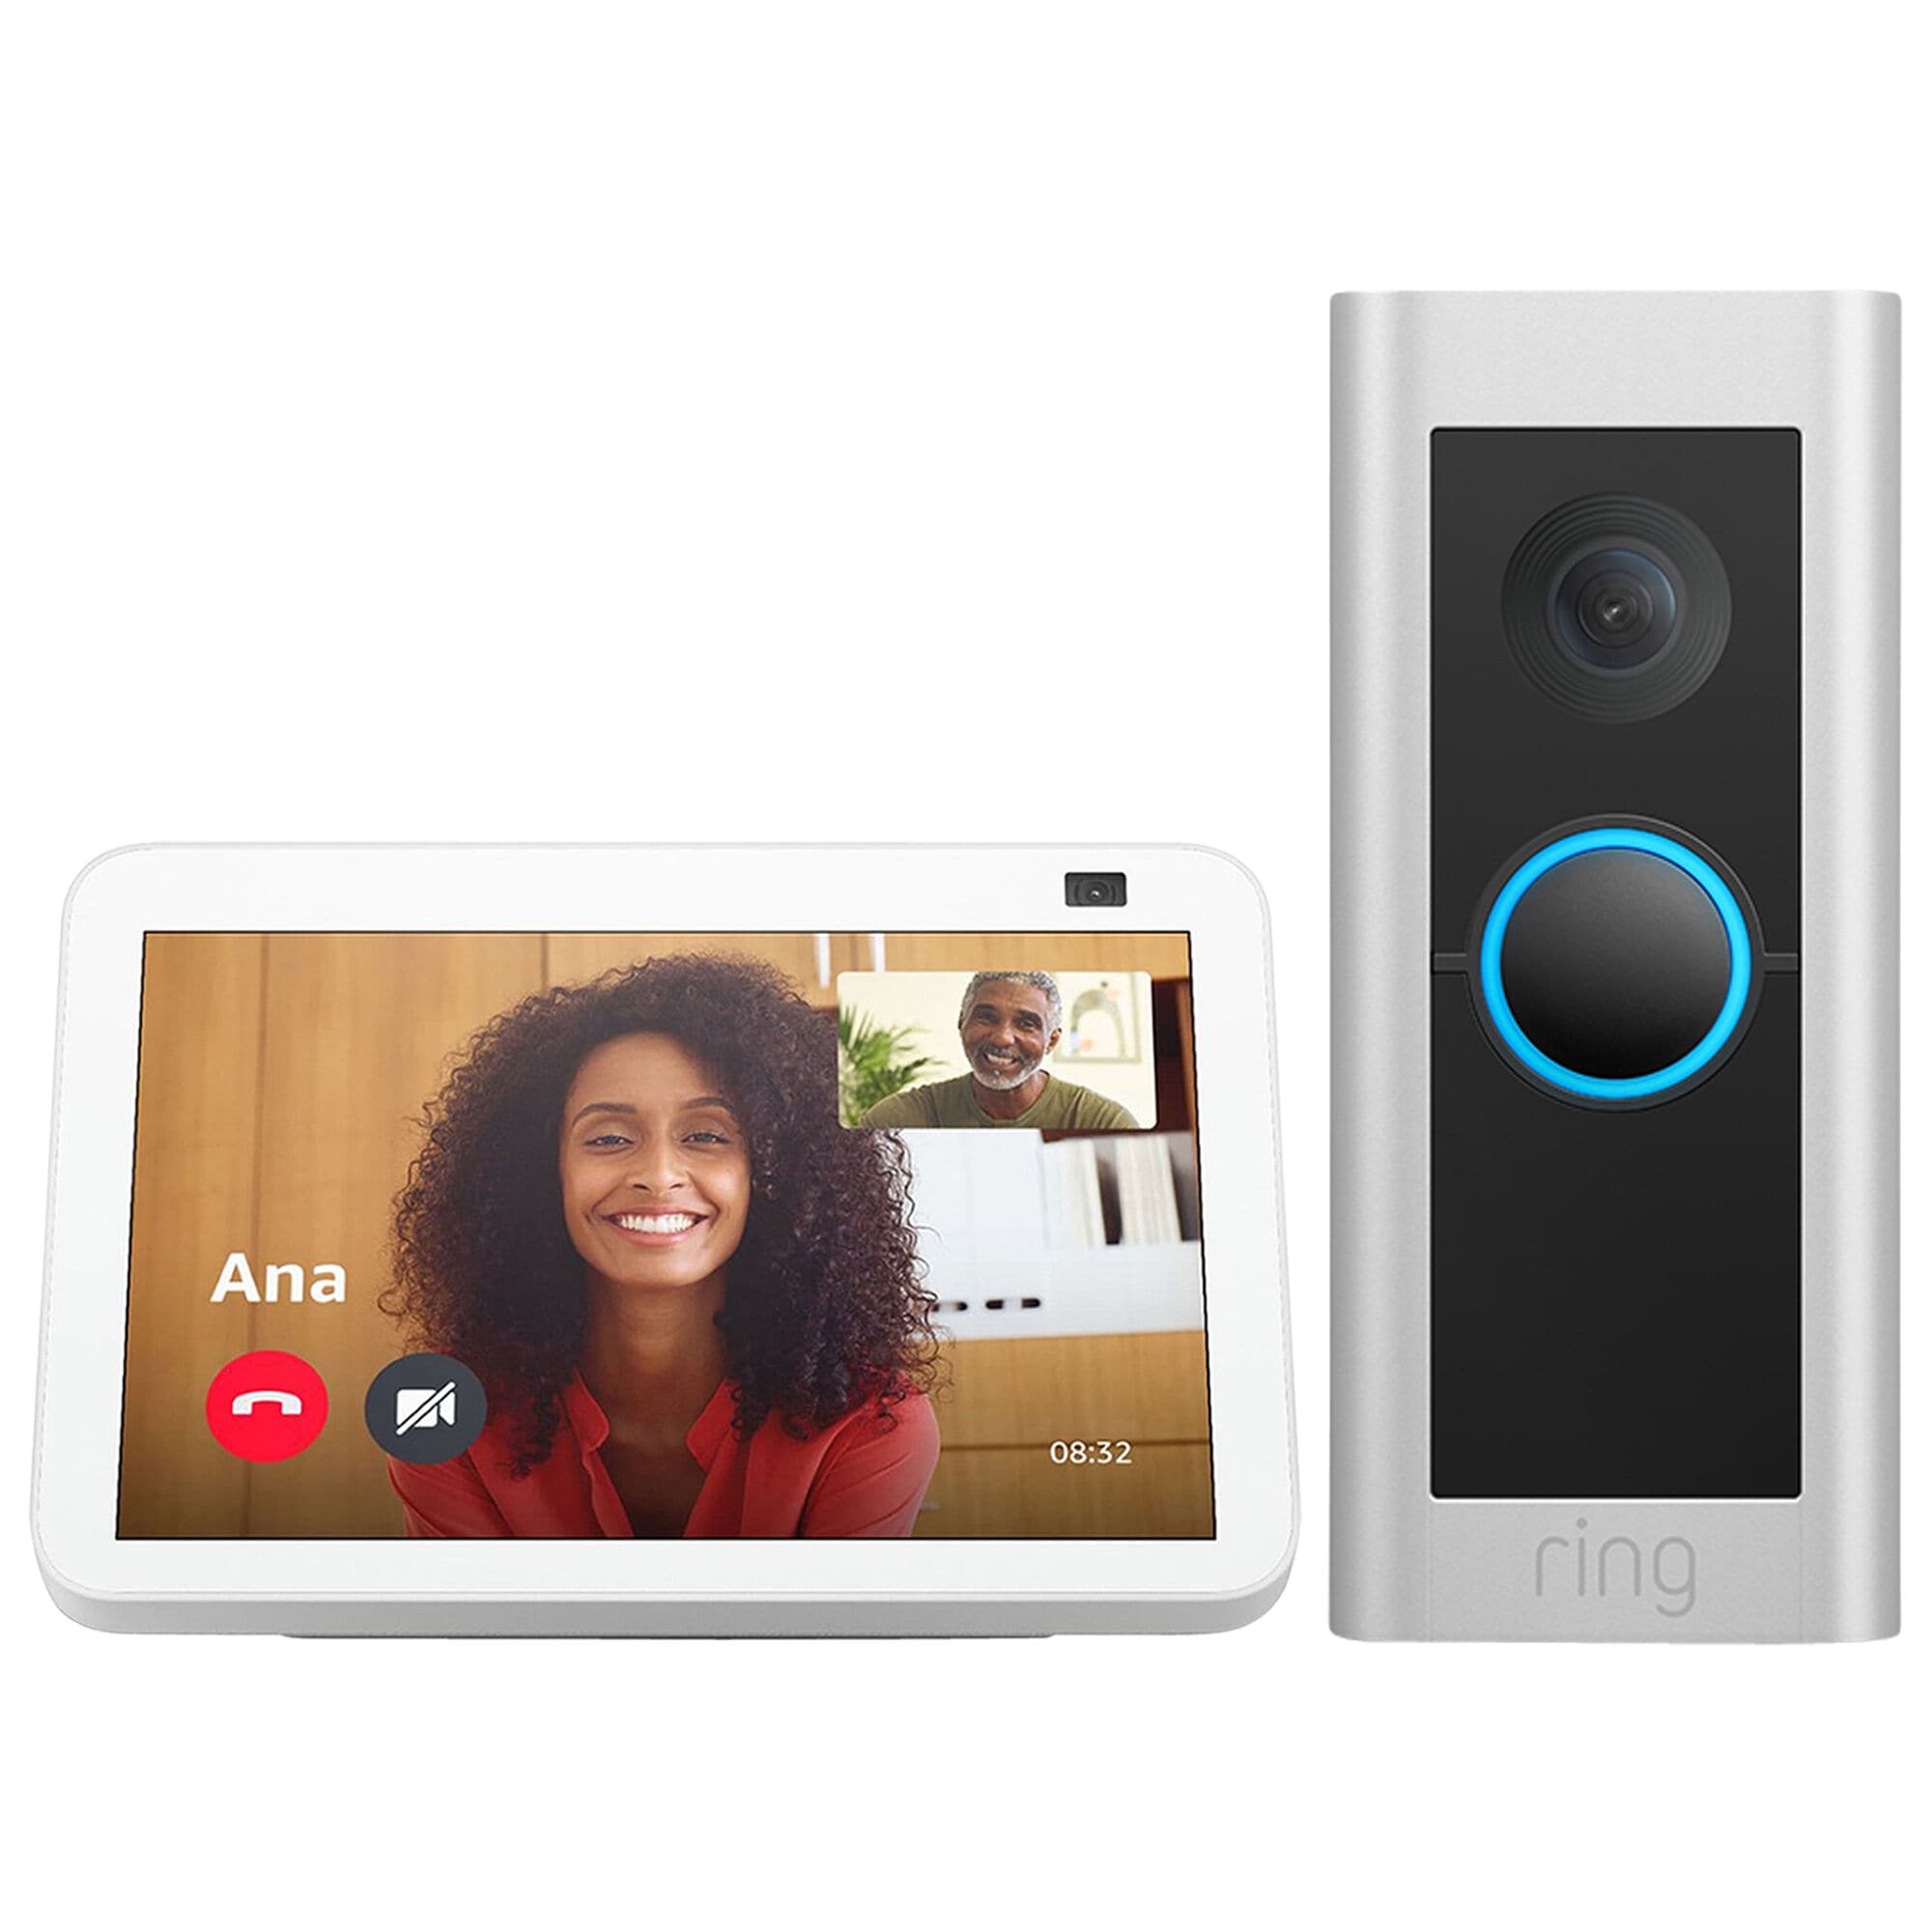 Selecting the Correct Wire Gauge for Ring Video Doorbell Pro